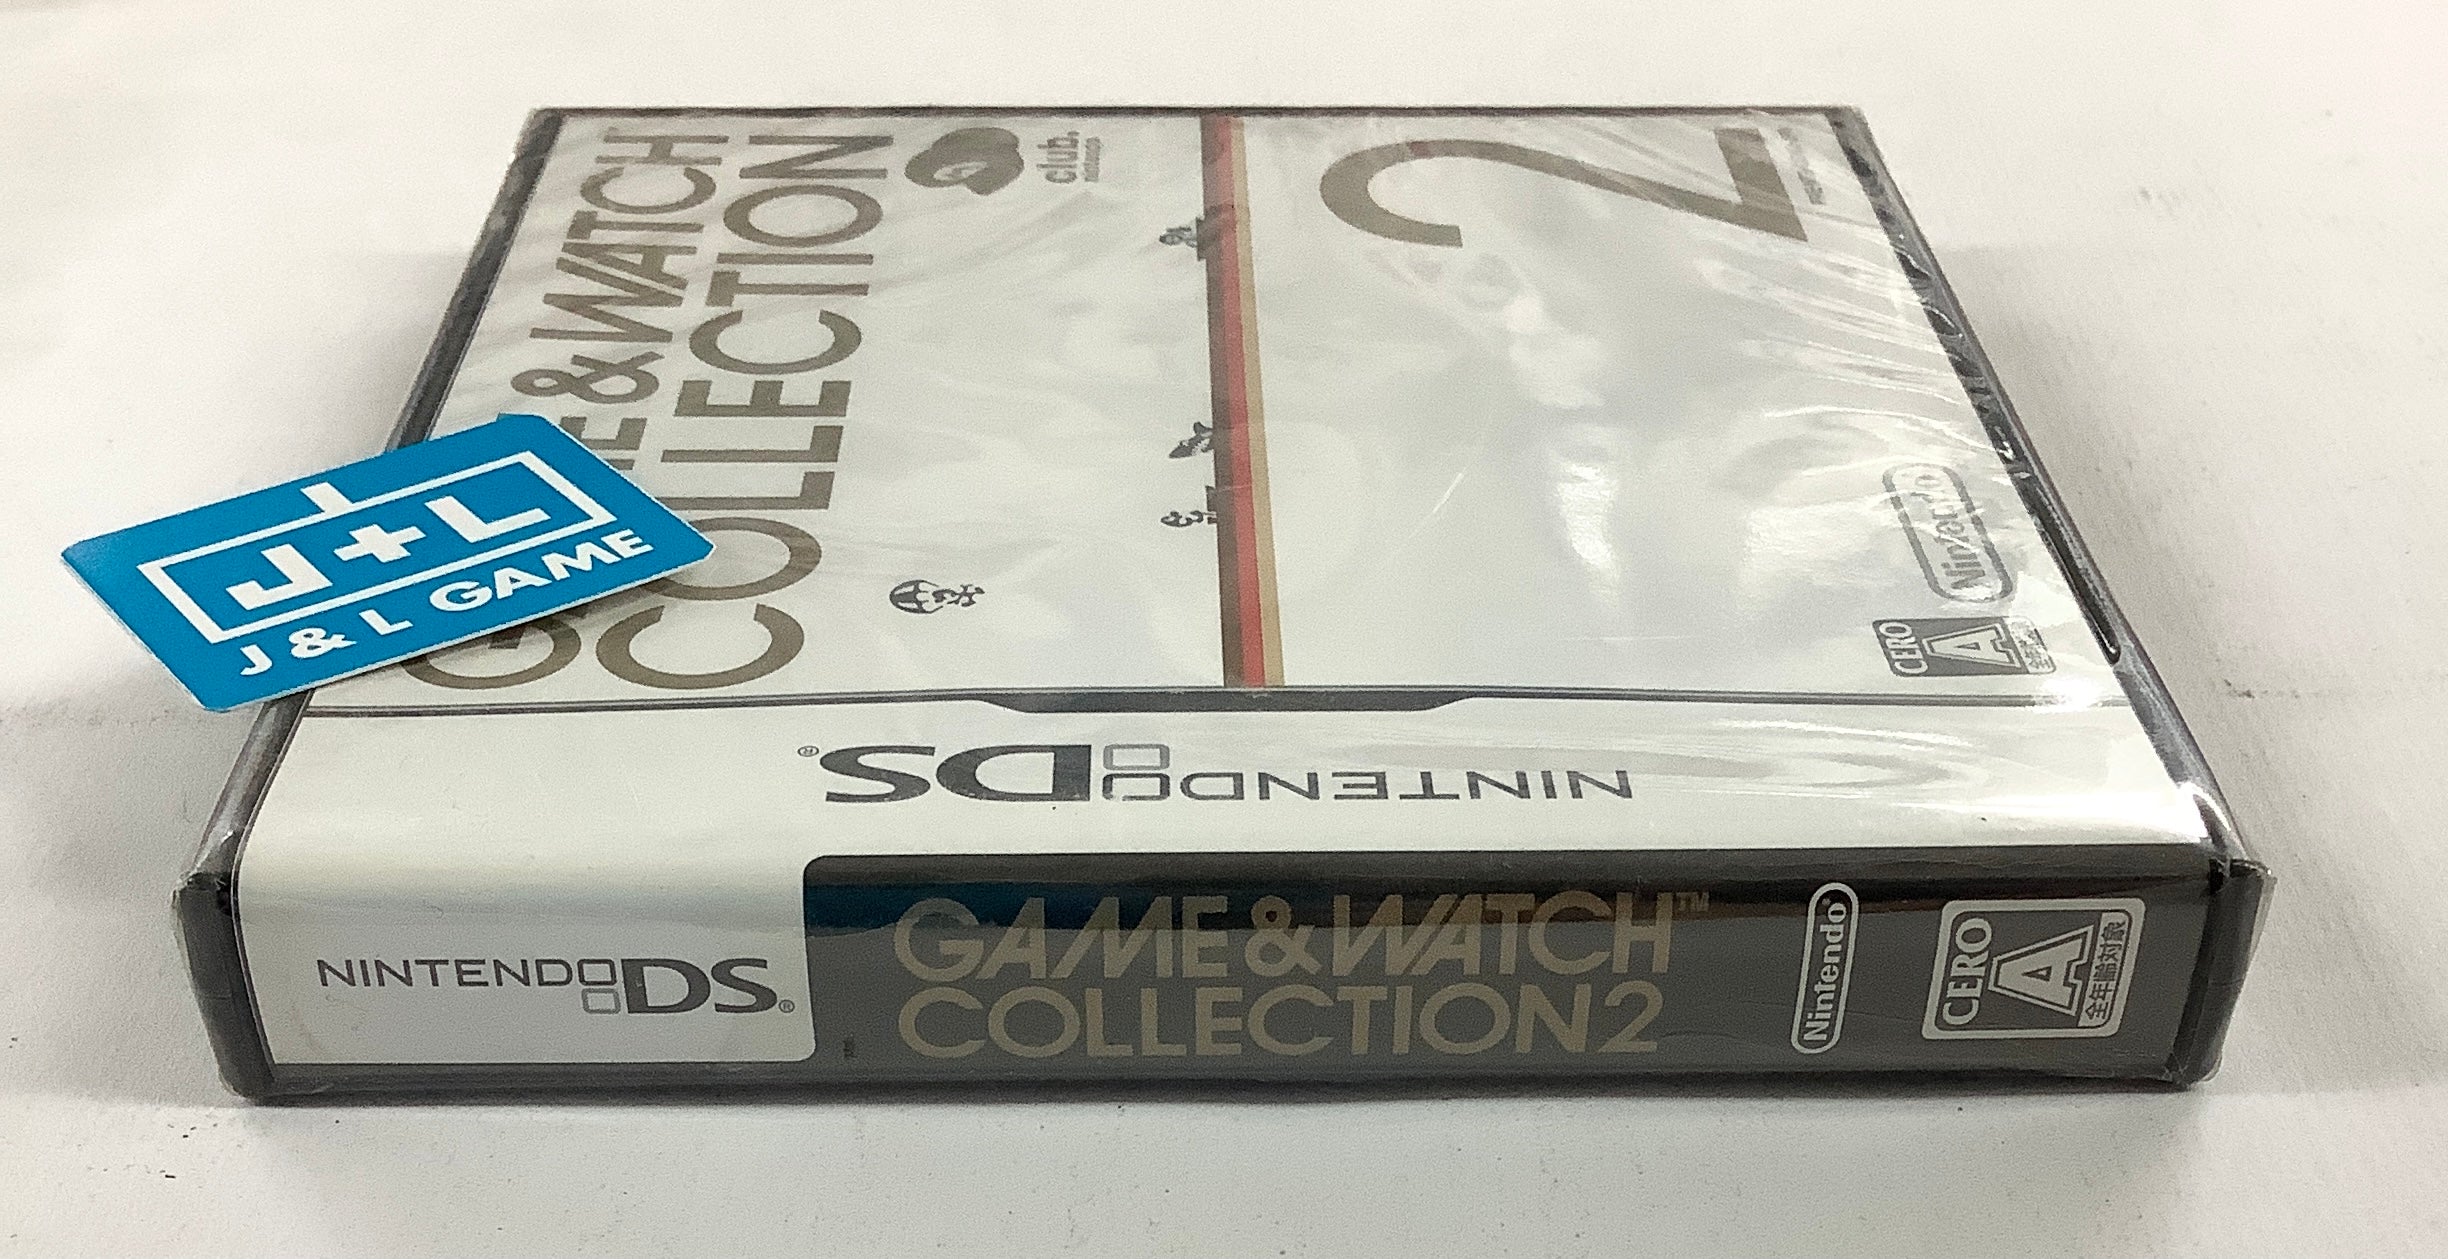 Game & Watch Collection 2 - (NDS) Nintendo DS (Japanese Import)